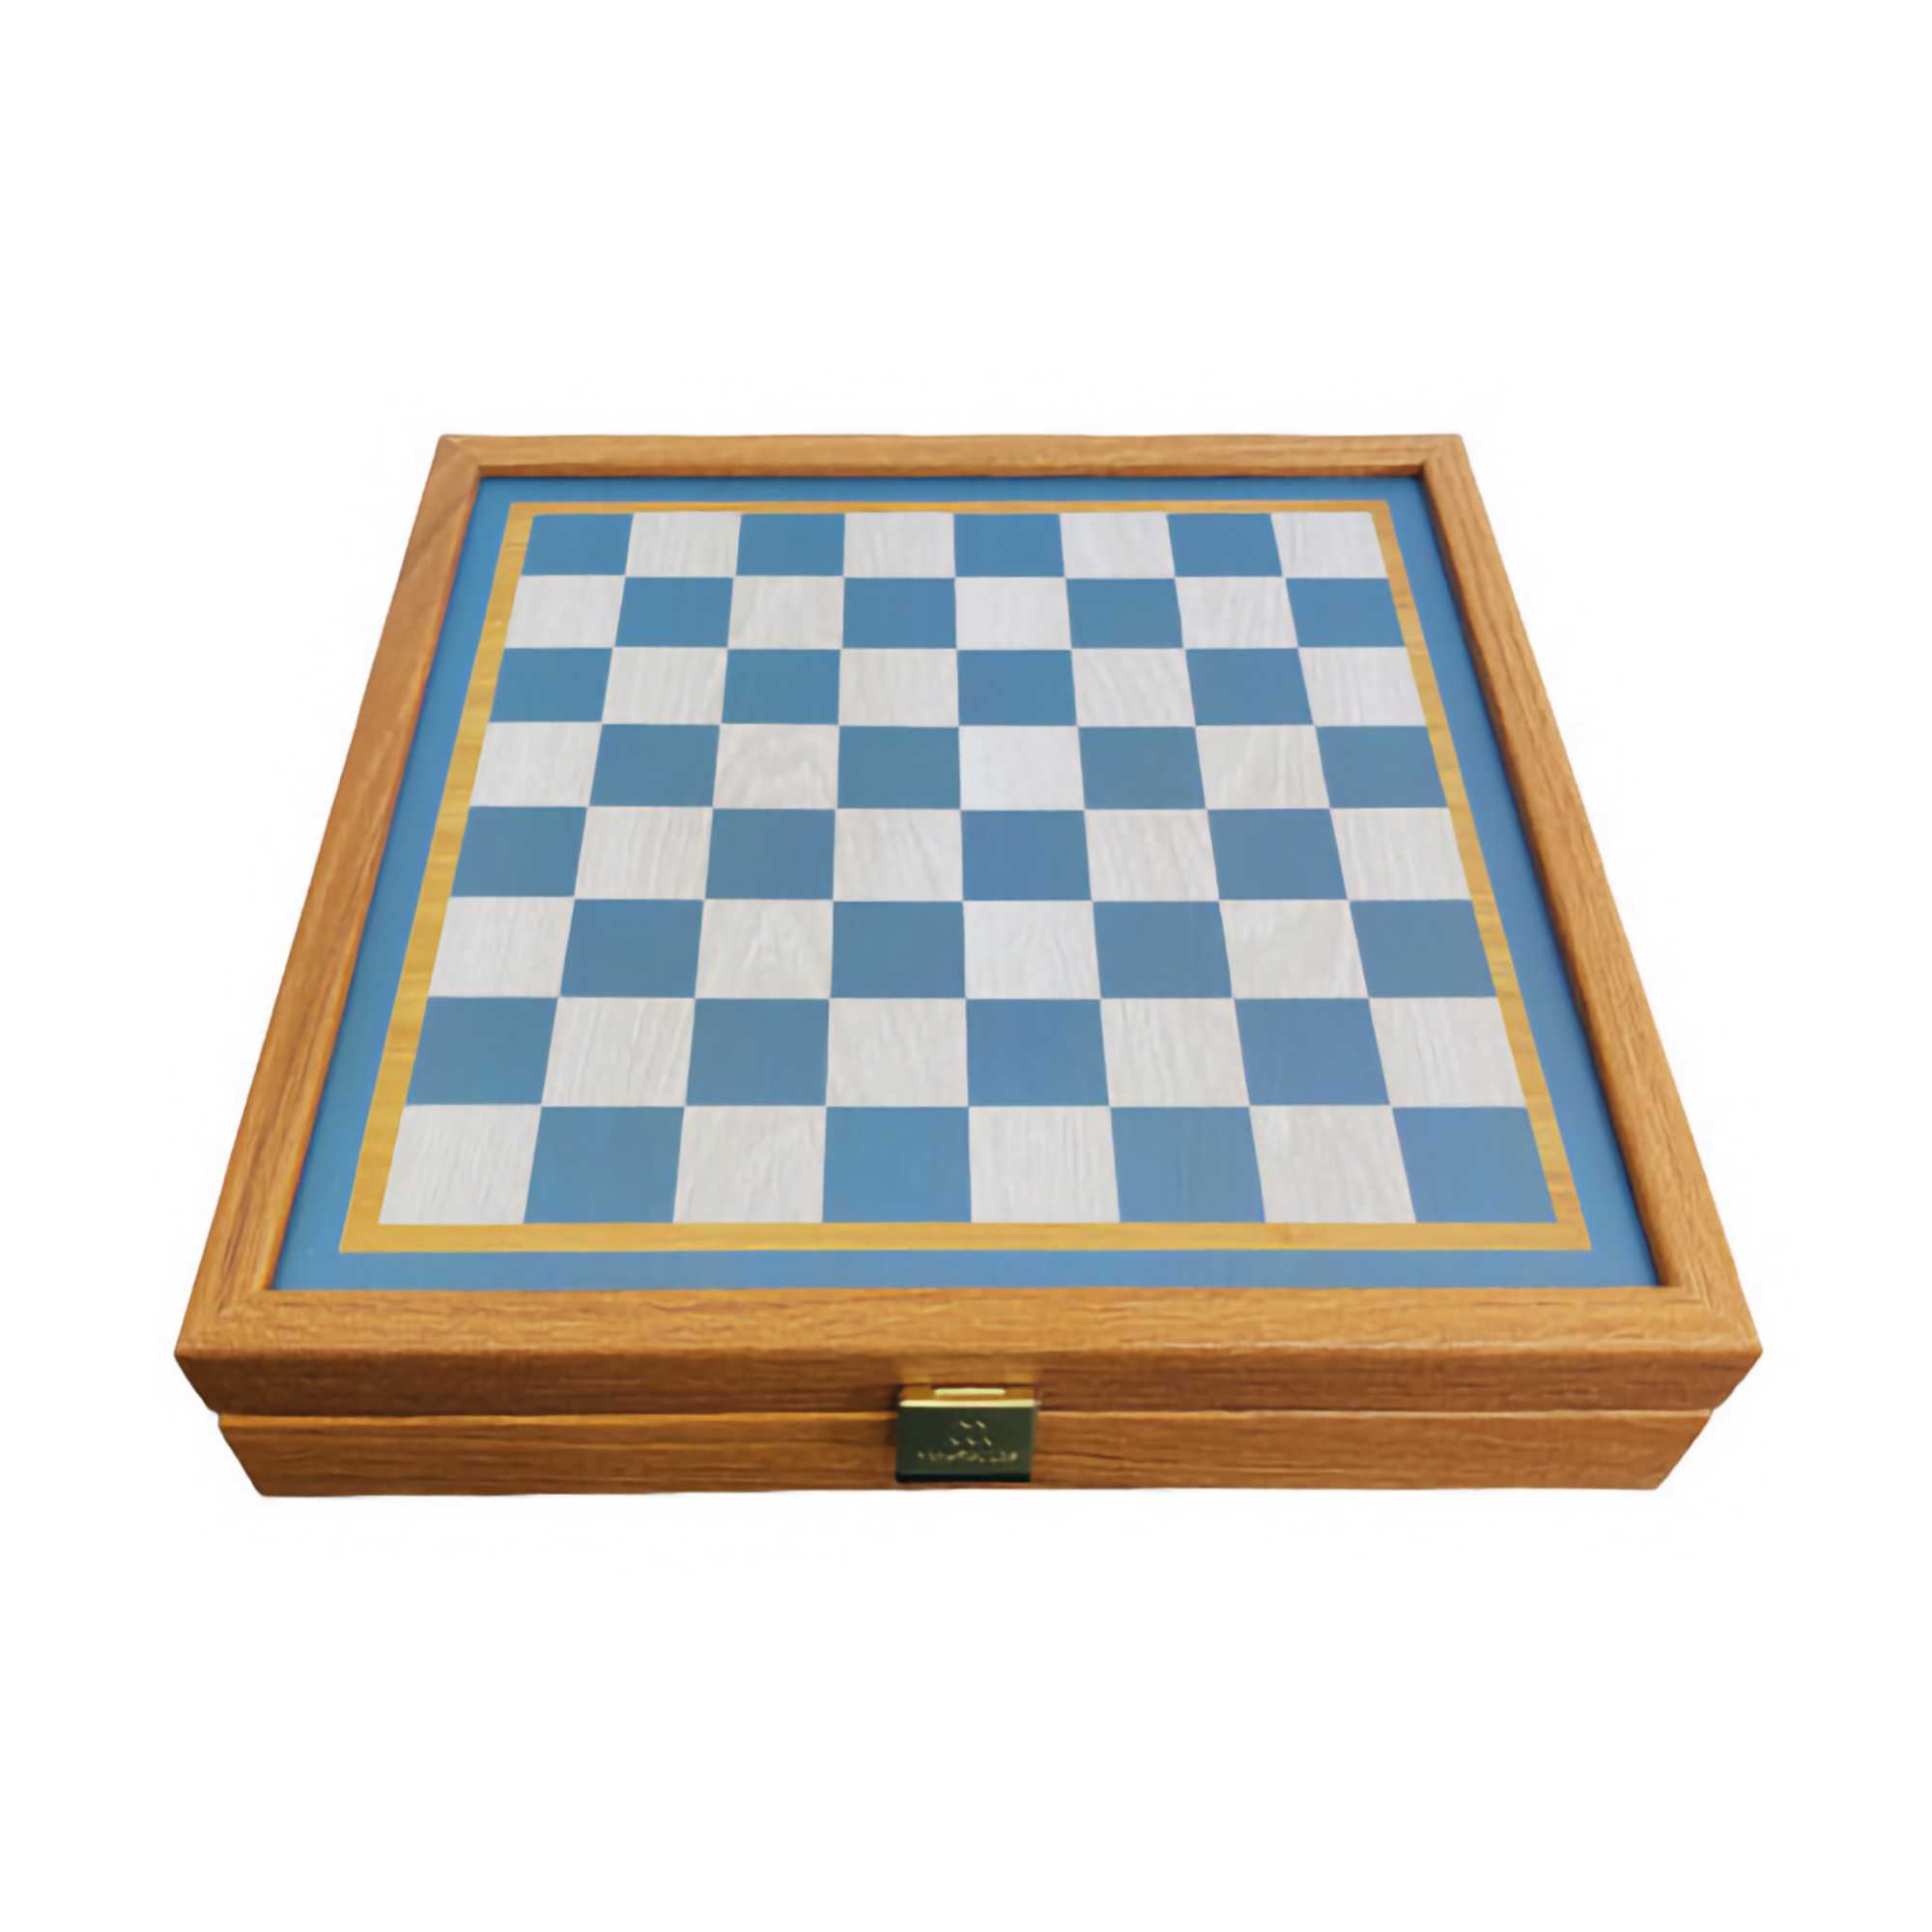 Manopoulos 2in1 Combo Game (chess and backgammon)